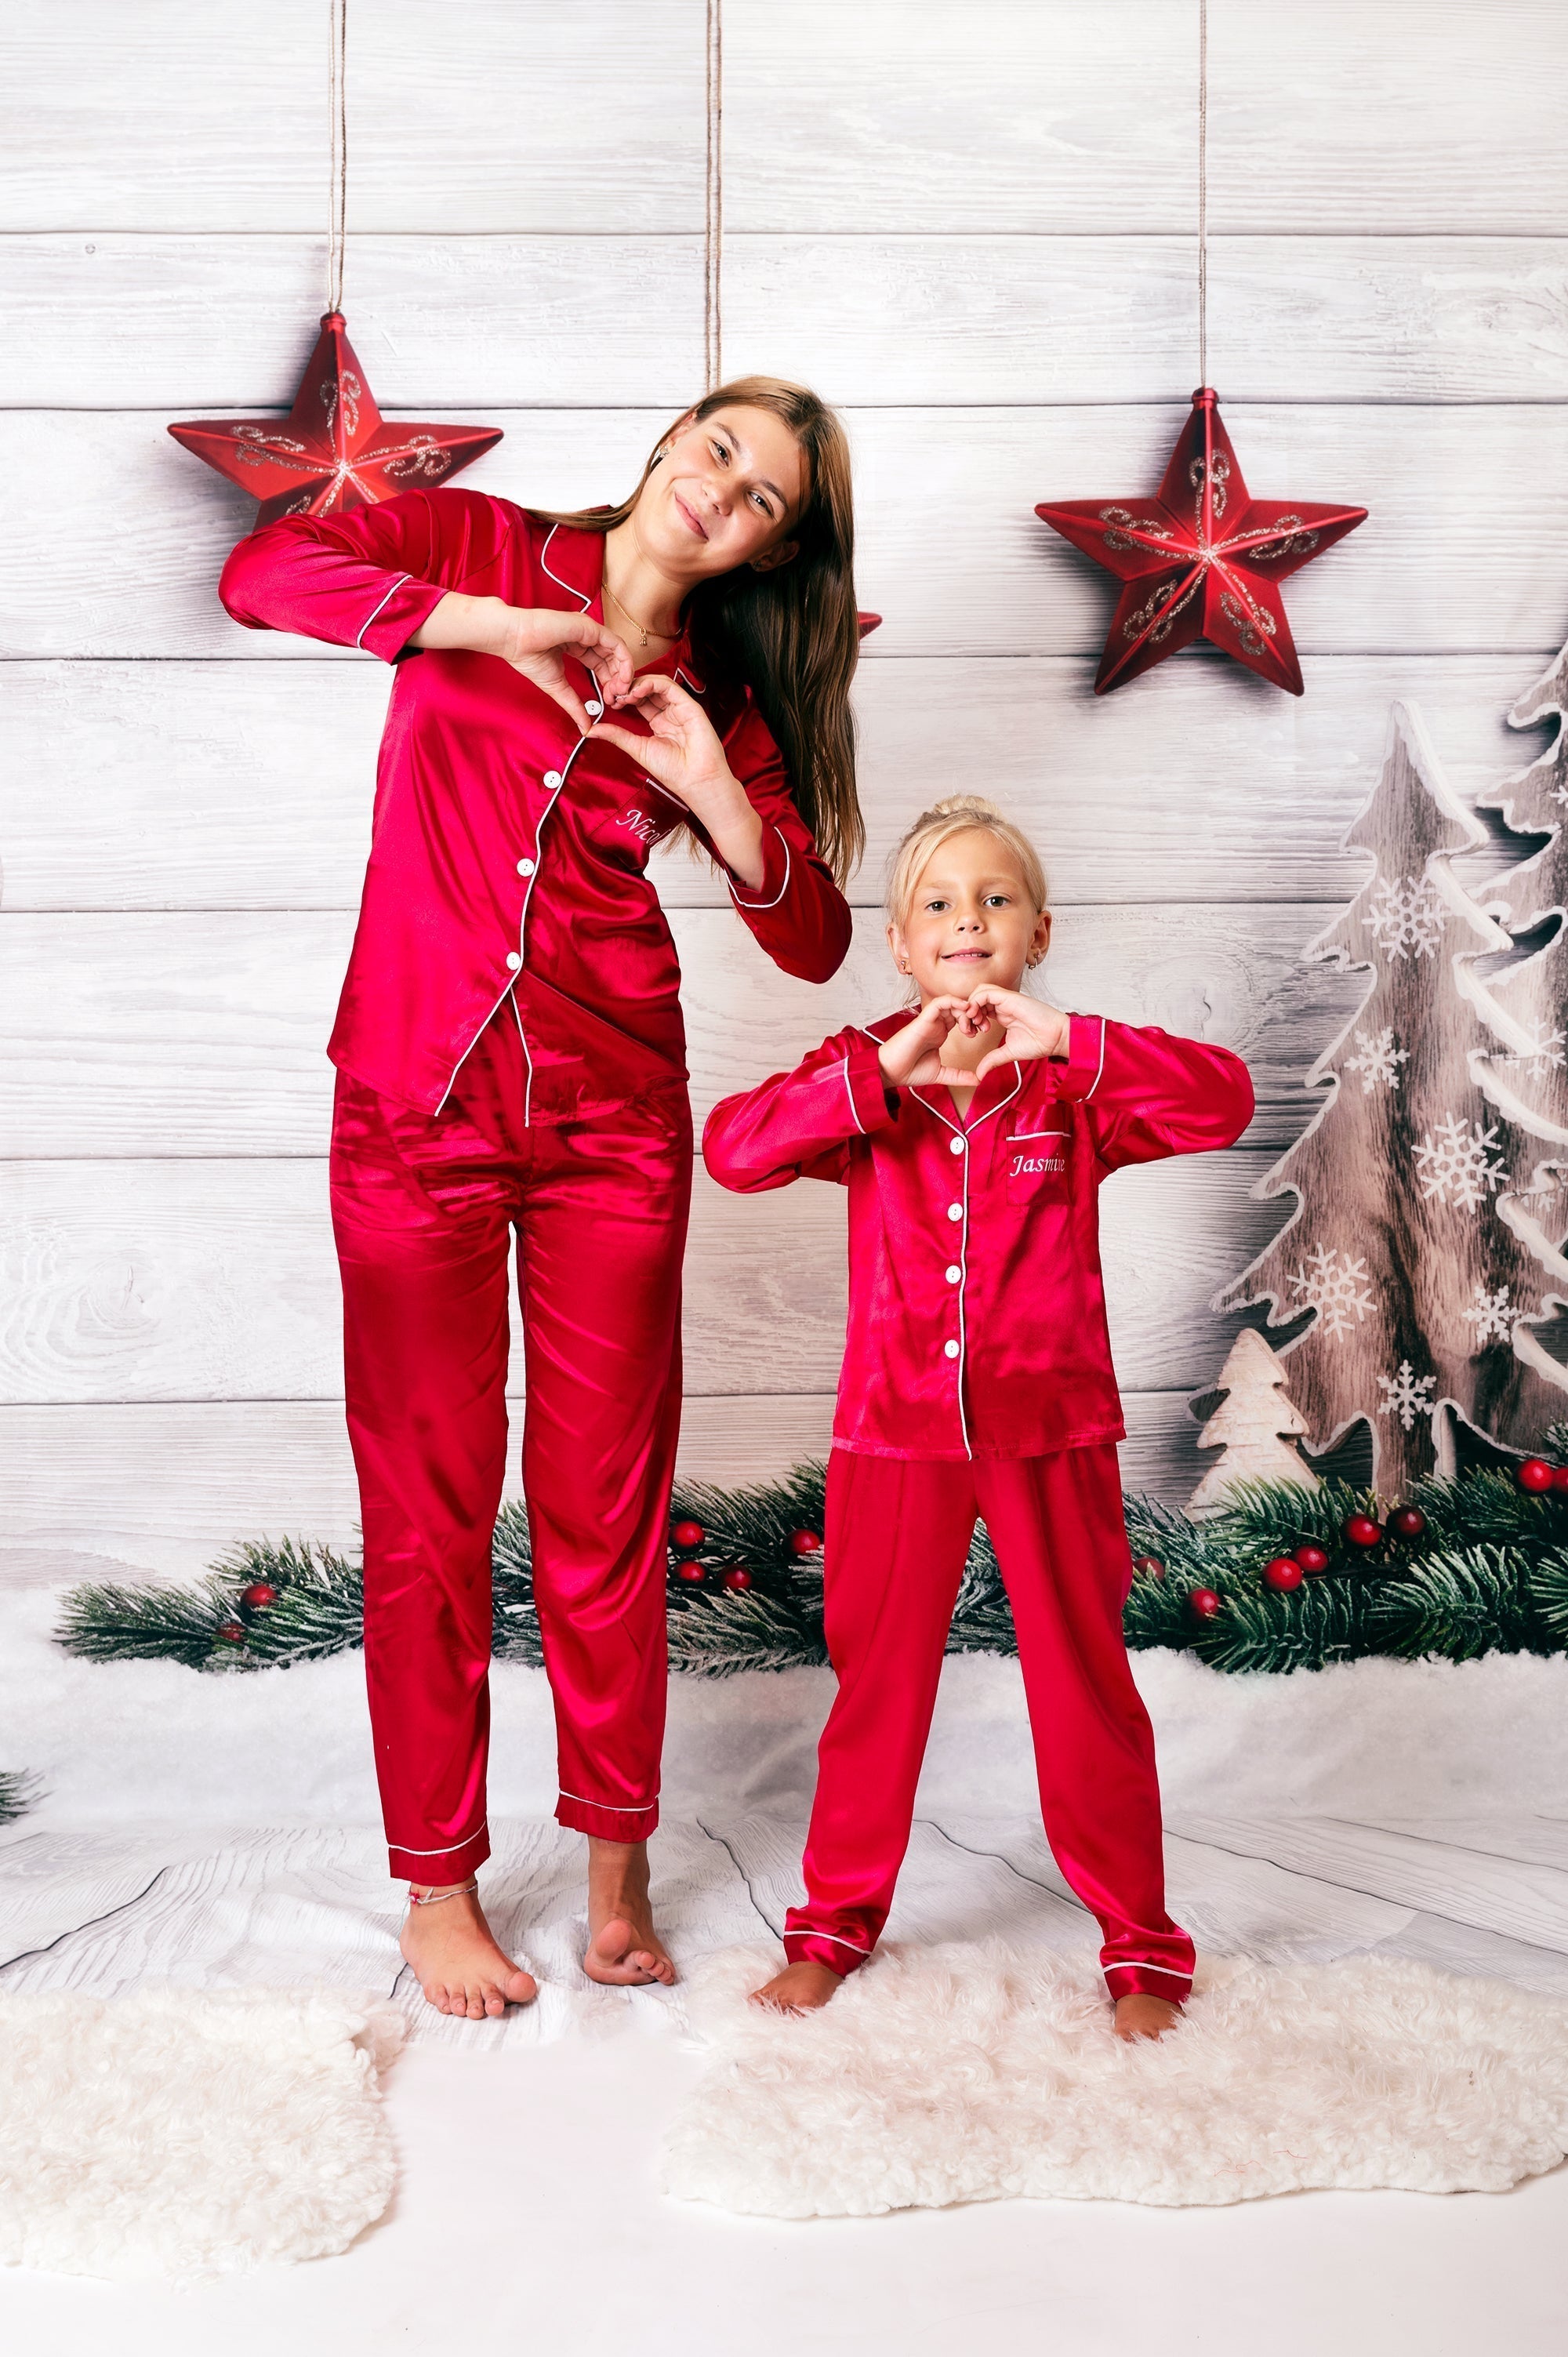 Christmas All Over Print Red Family Matching Long-sleeve Pajamas Sets (Flame Resistant)